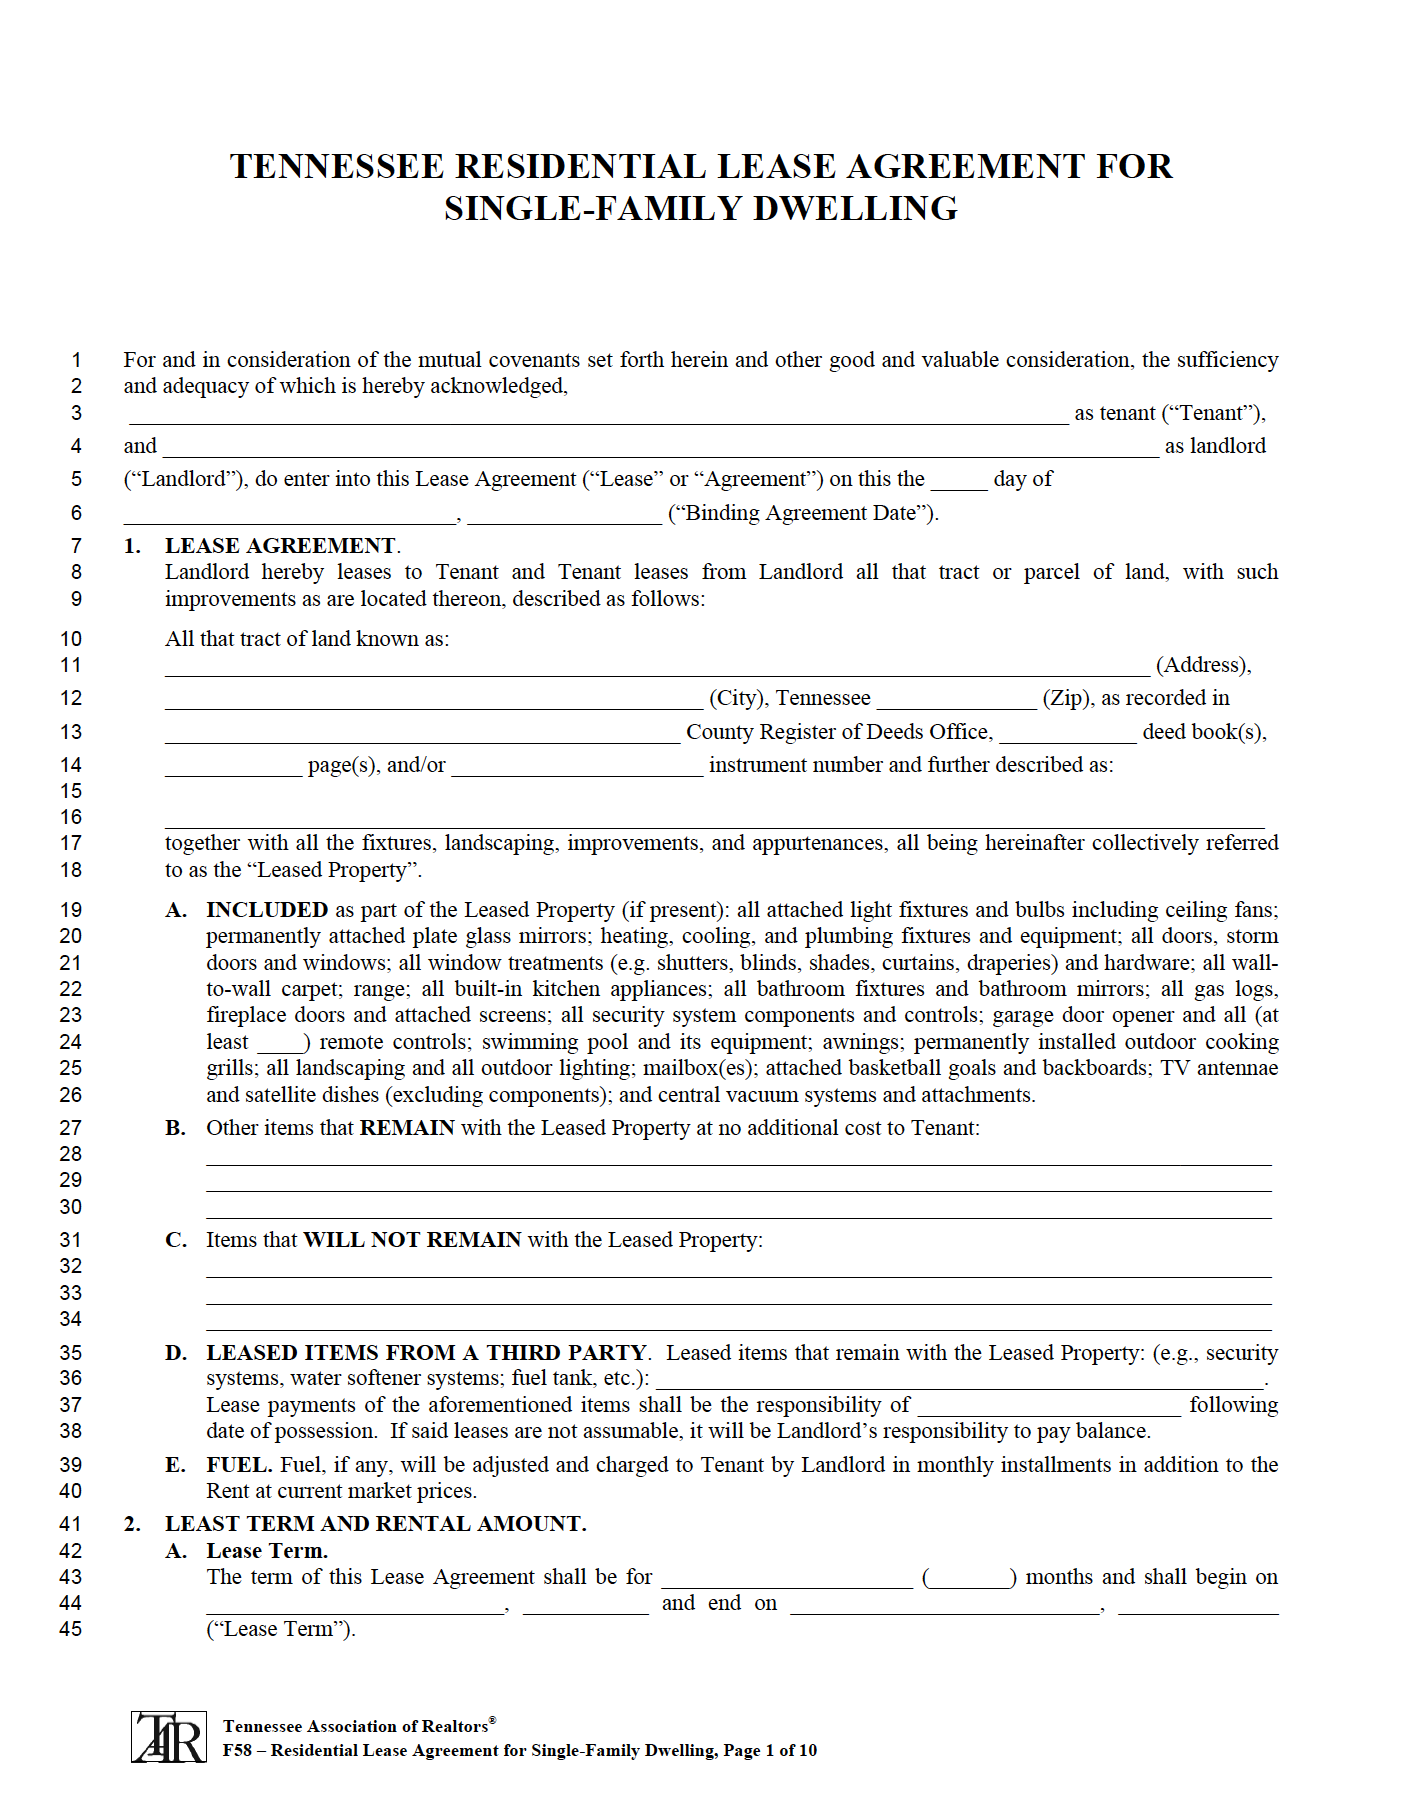 Free Tennessee Rental Lease Agreement Templates  PDF Throughout new jersey residential lease agreement template